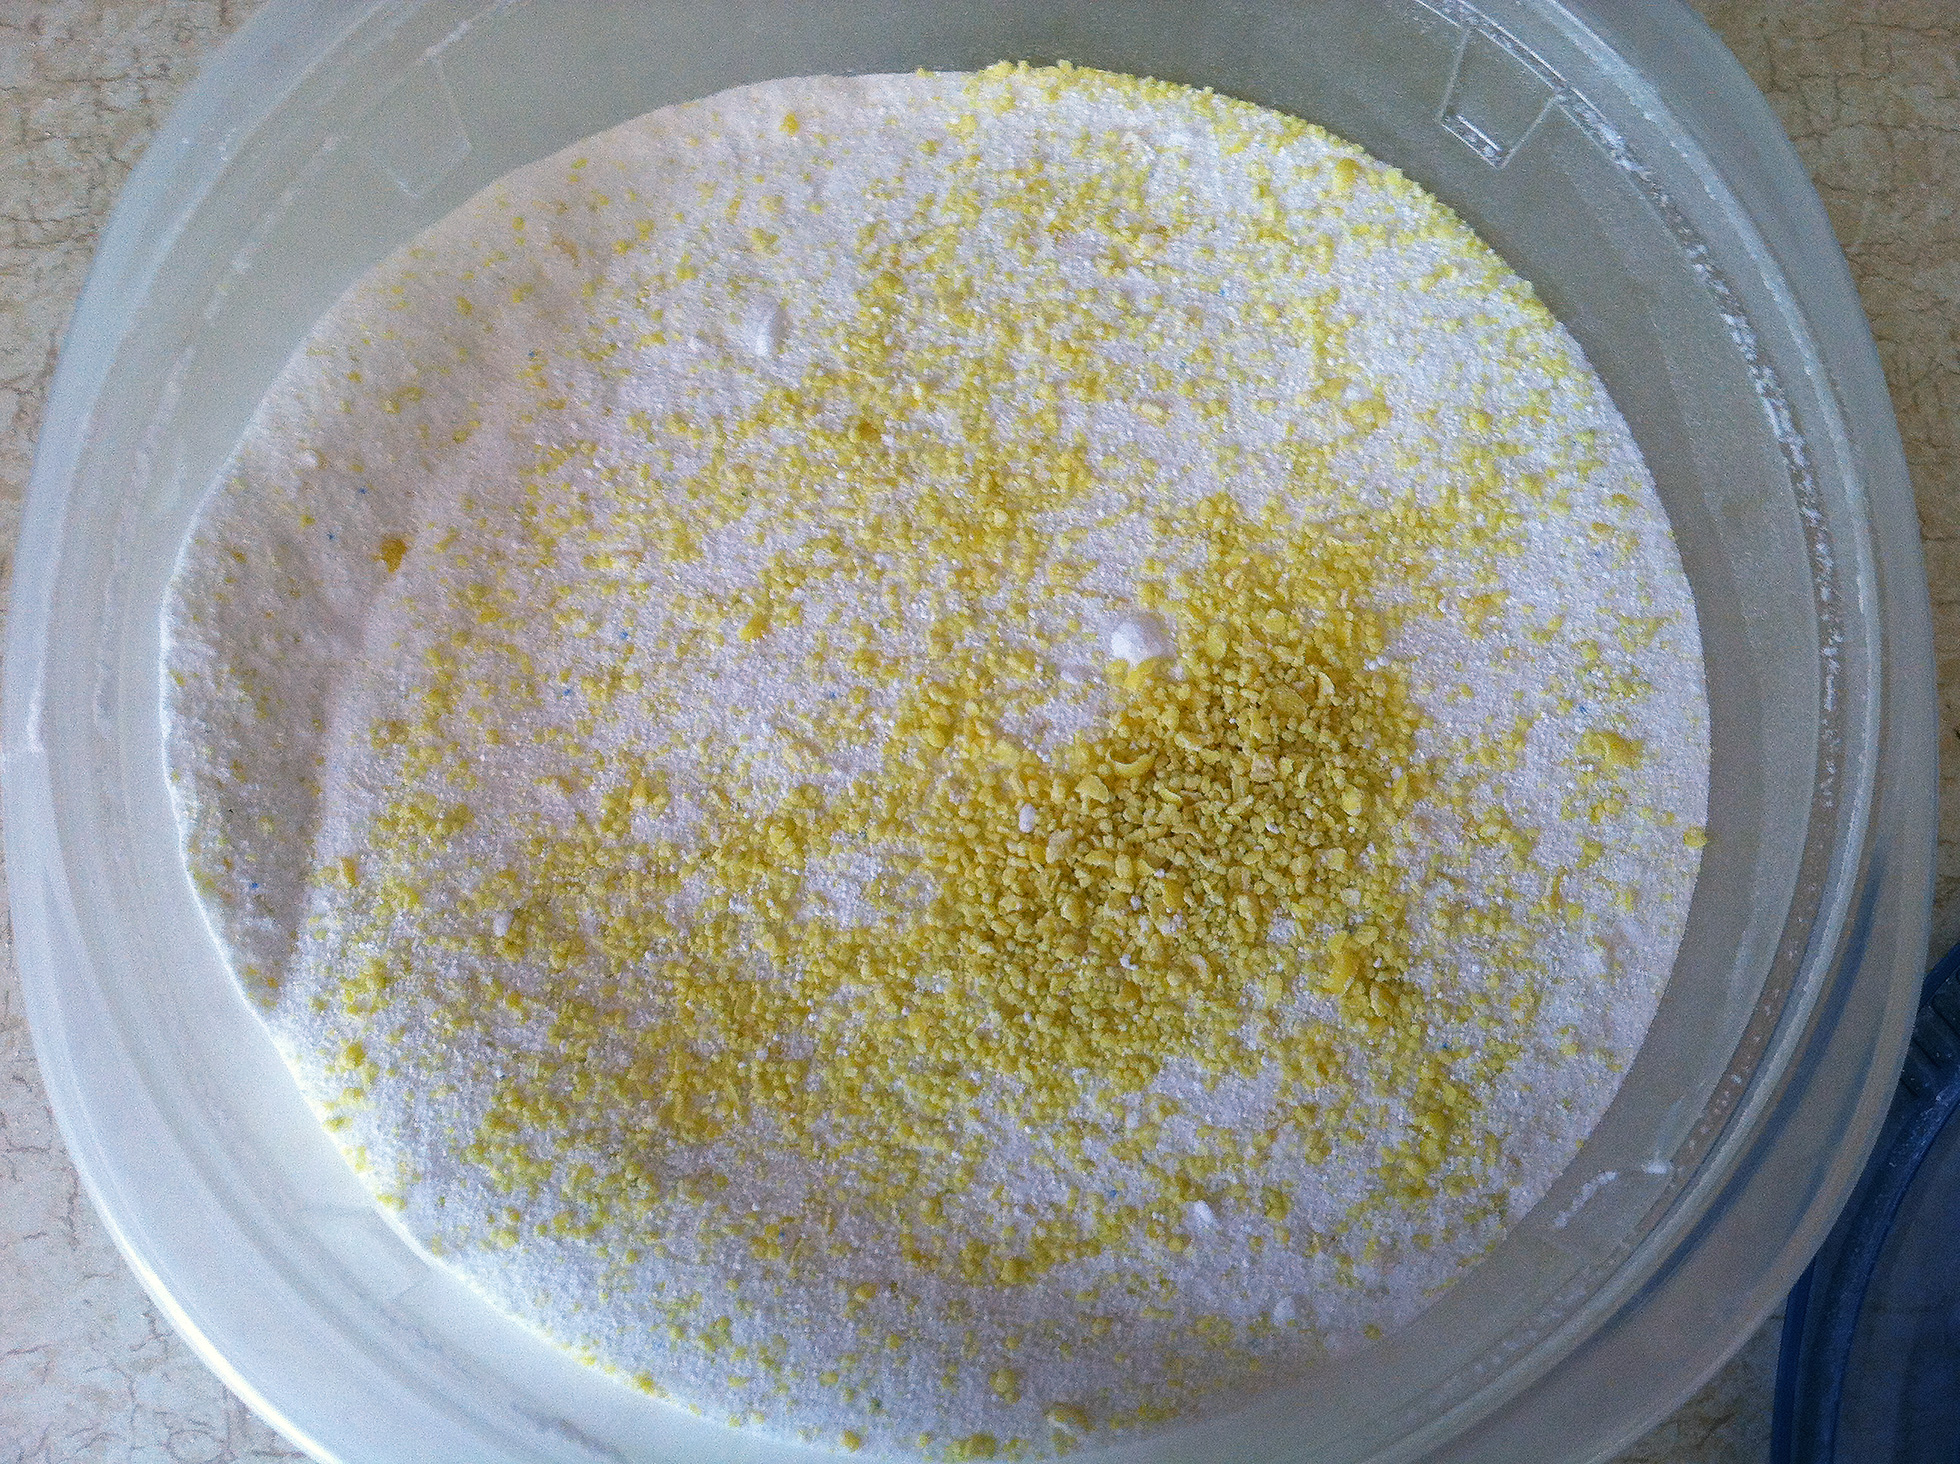 Powder created by clothes detergent recipe #3